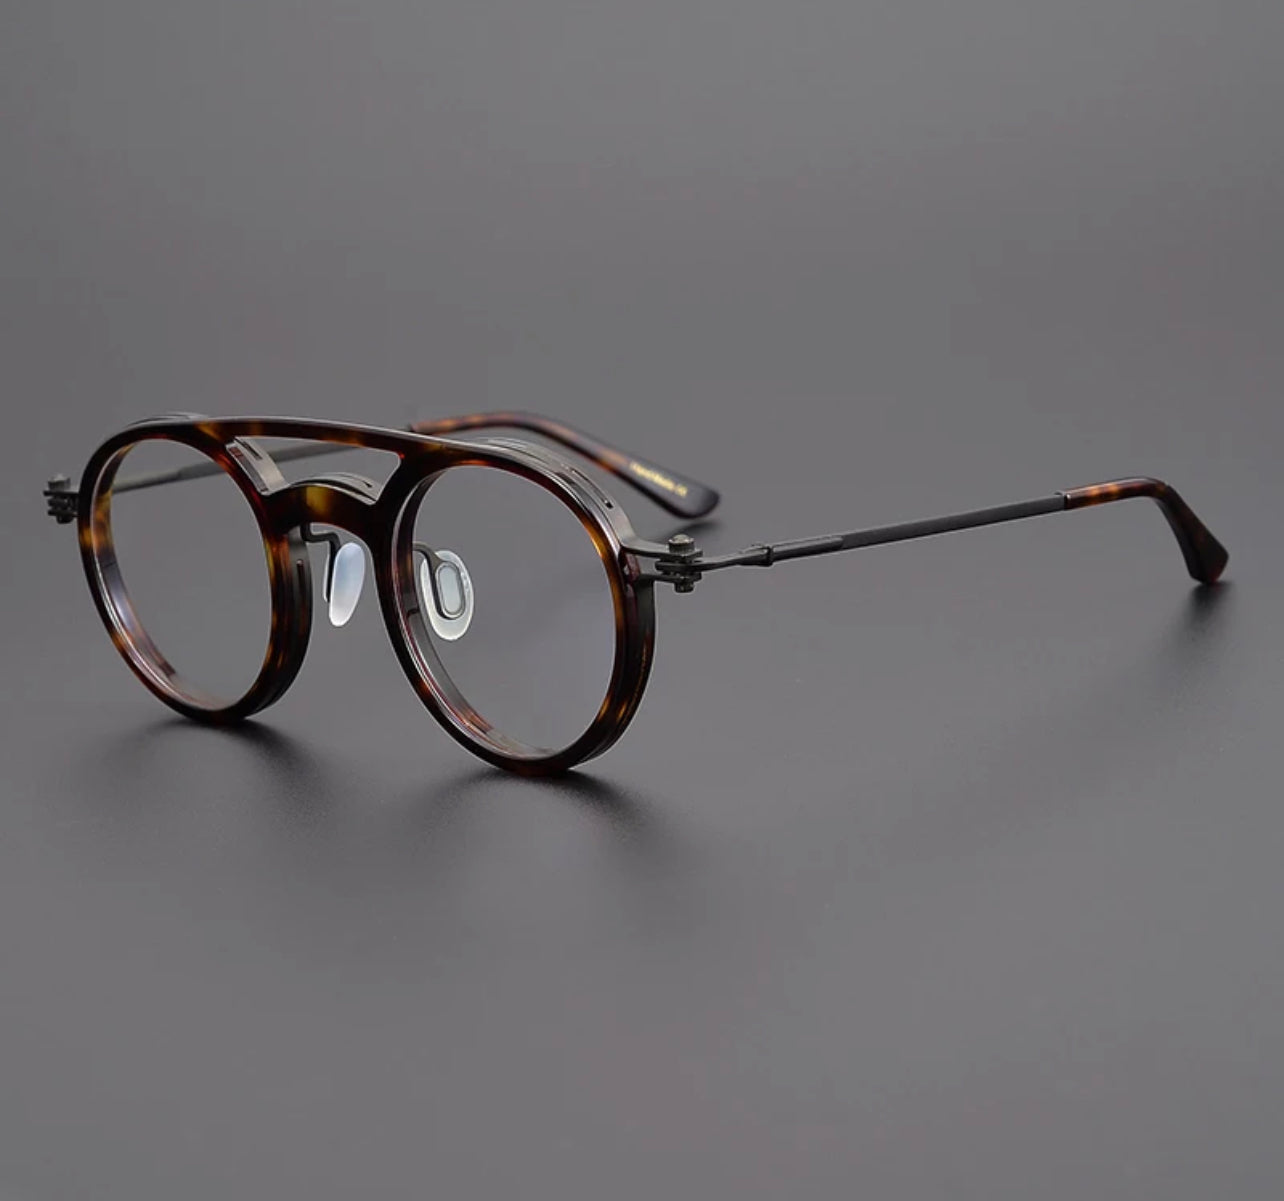  Exquisite handmade sheet metal frames. With a luxurious retro look. 